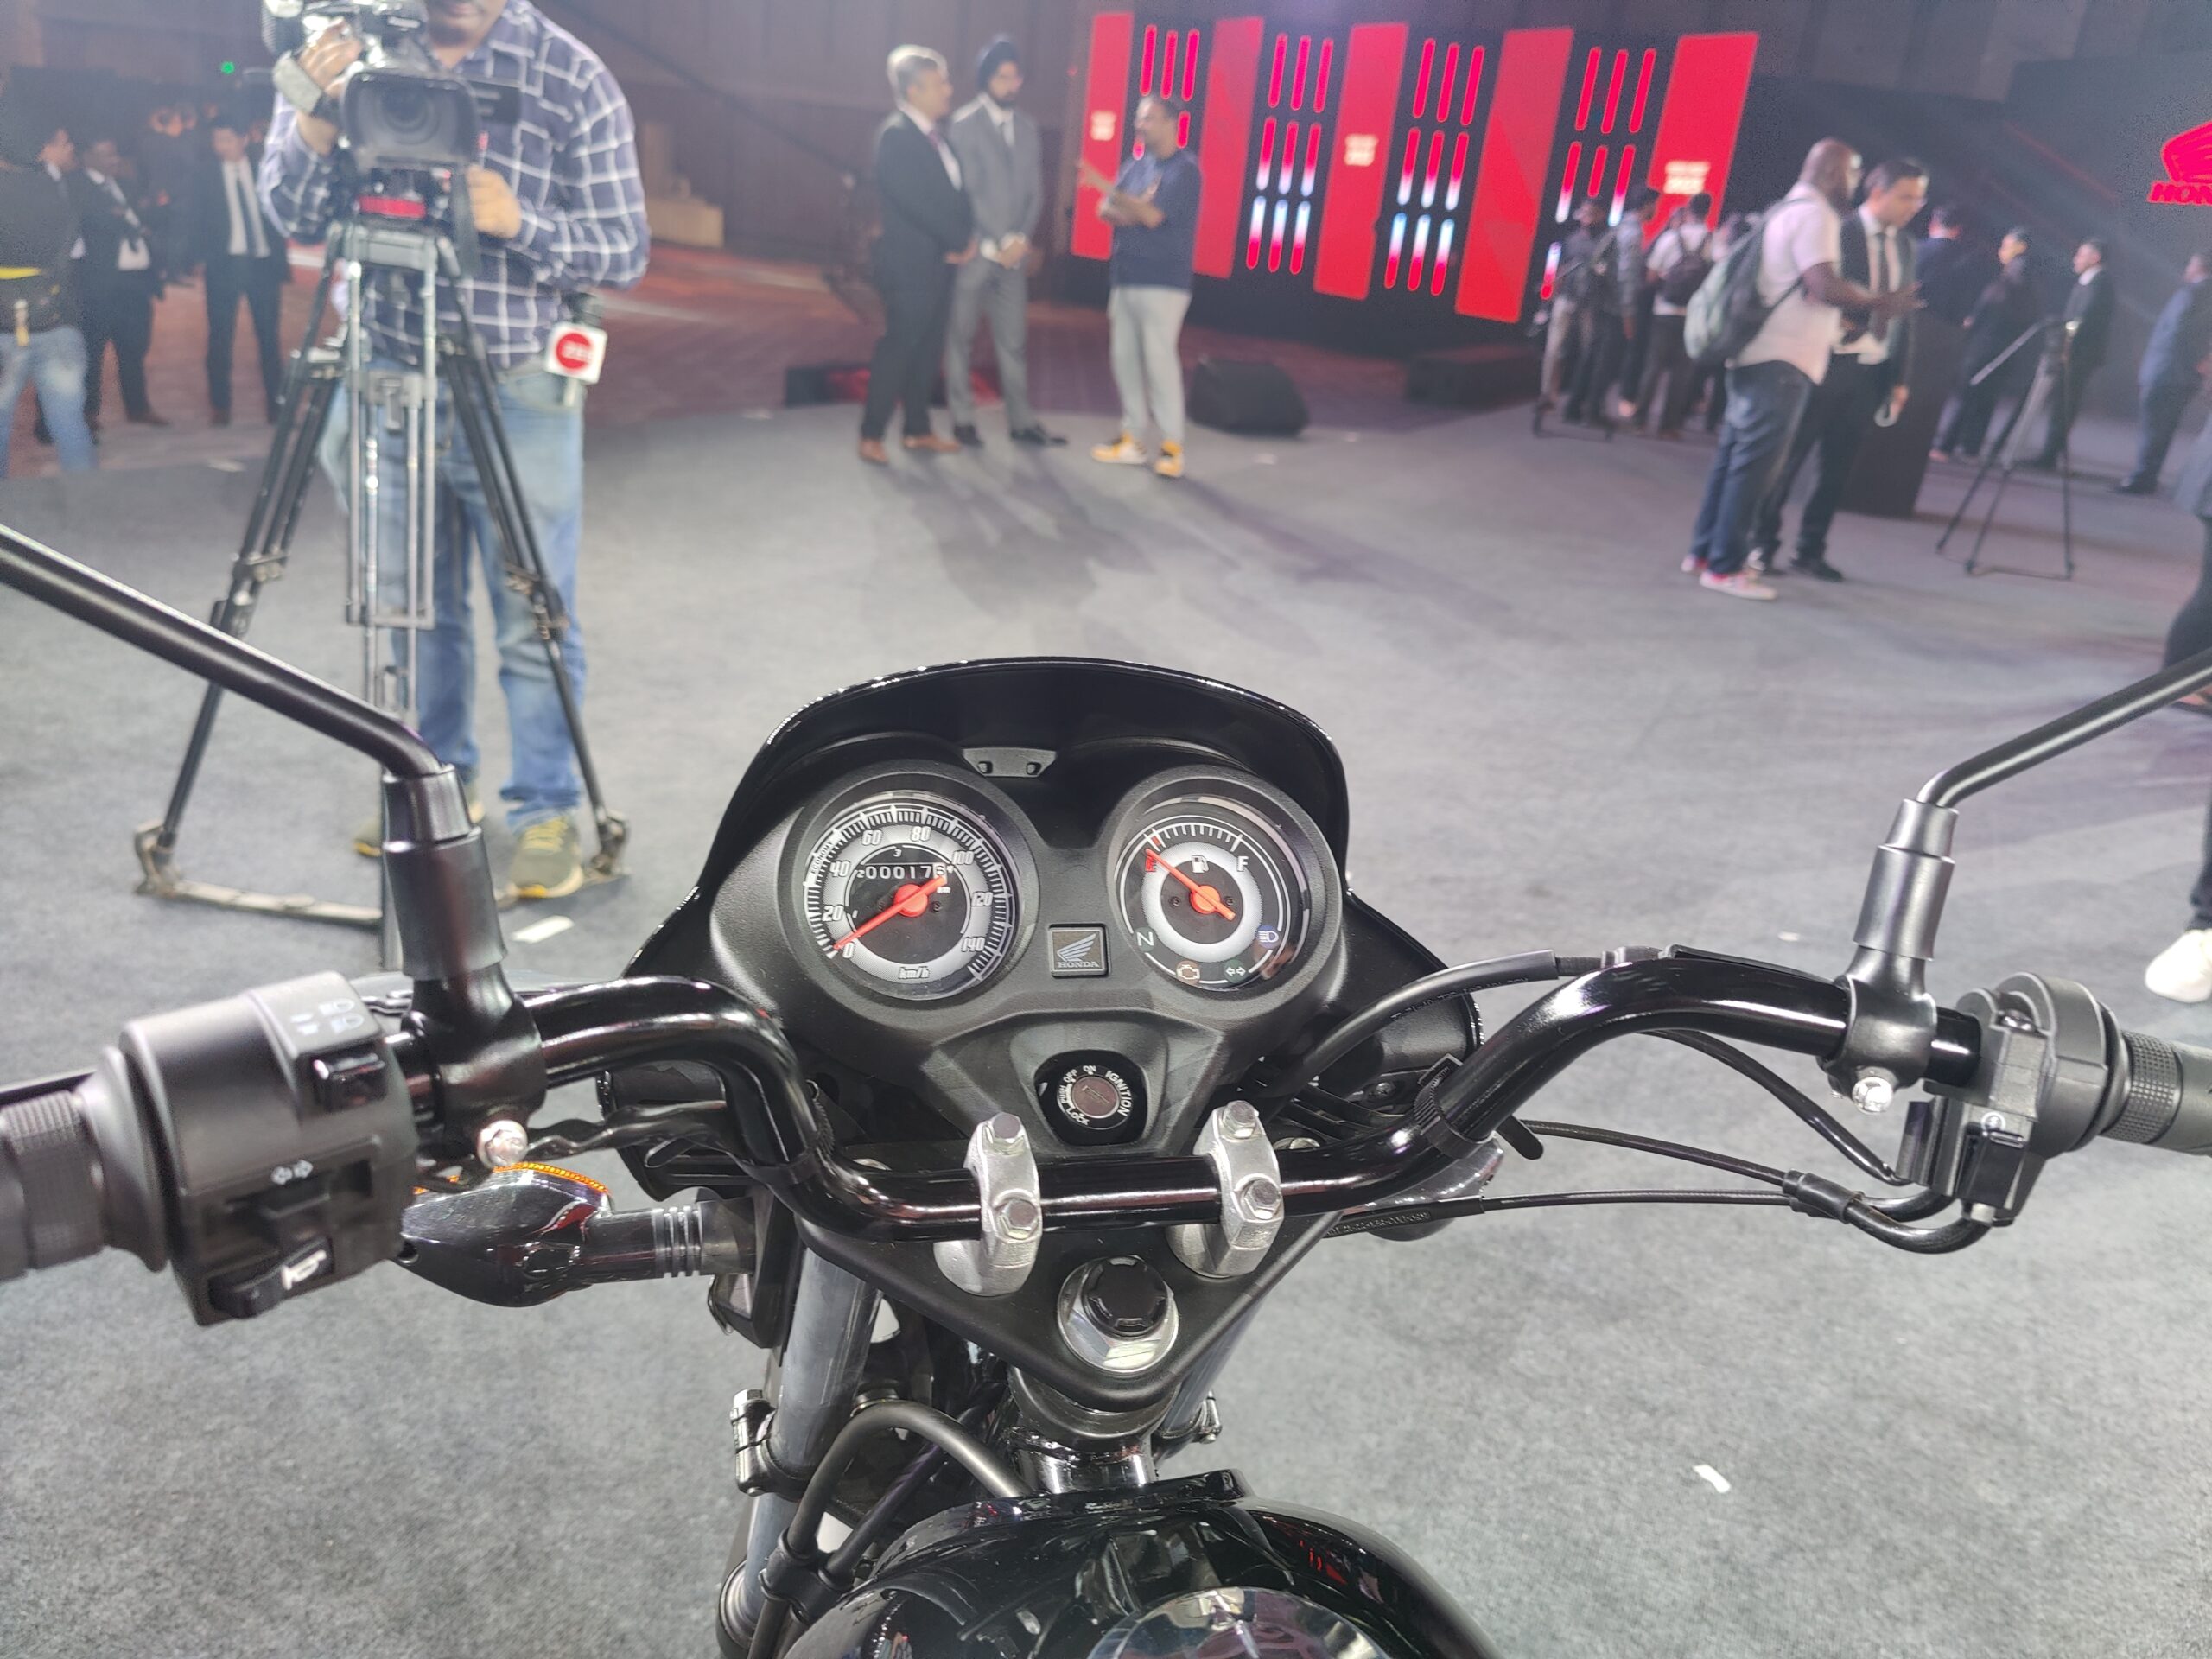 All New Honda Shine 100 Launched At Rs 65,000 (3)